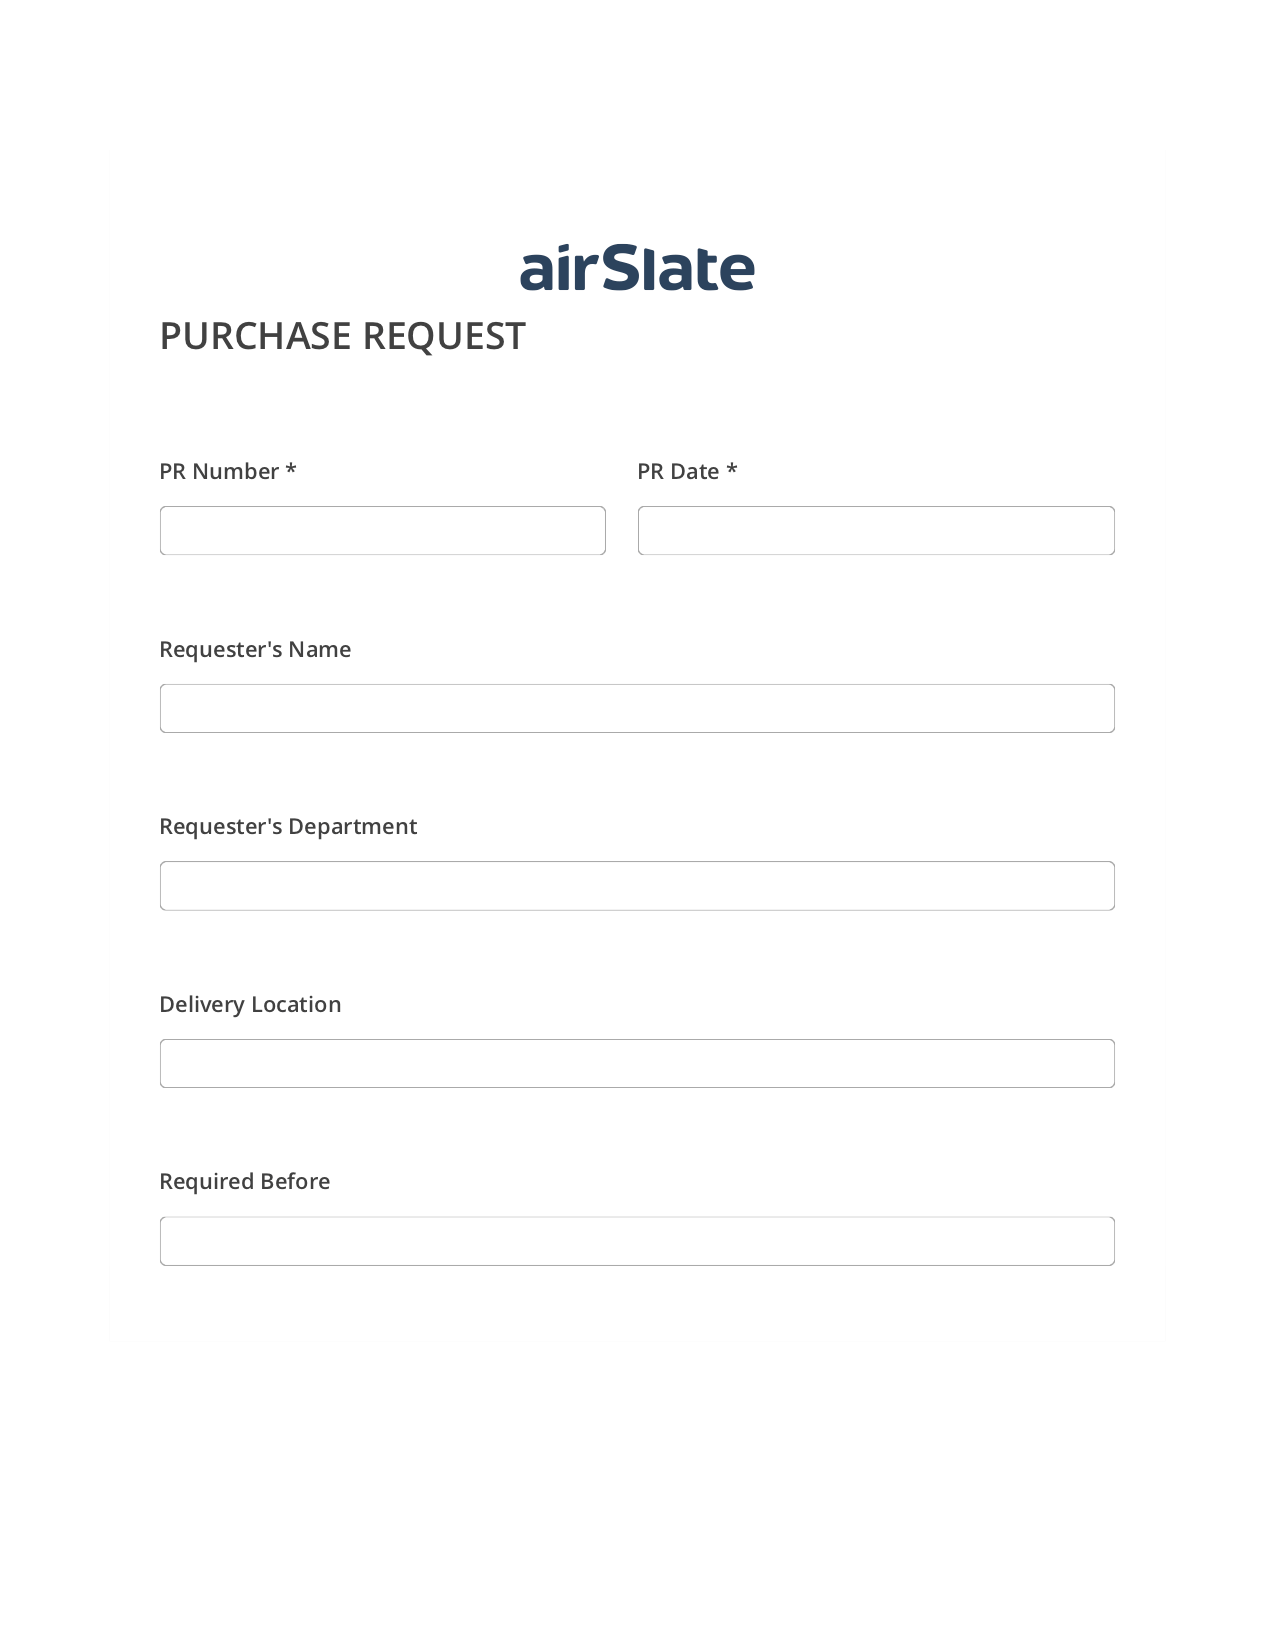 Item Purchase Request Workflow Pre-fill from Salesforce Records Bot, Remove Tags From Slate Bot, Webhook Postfinish Bot